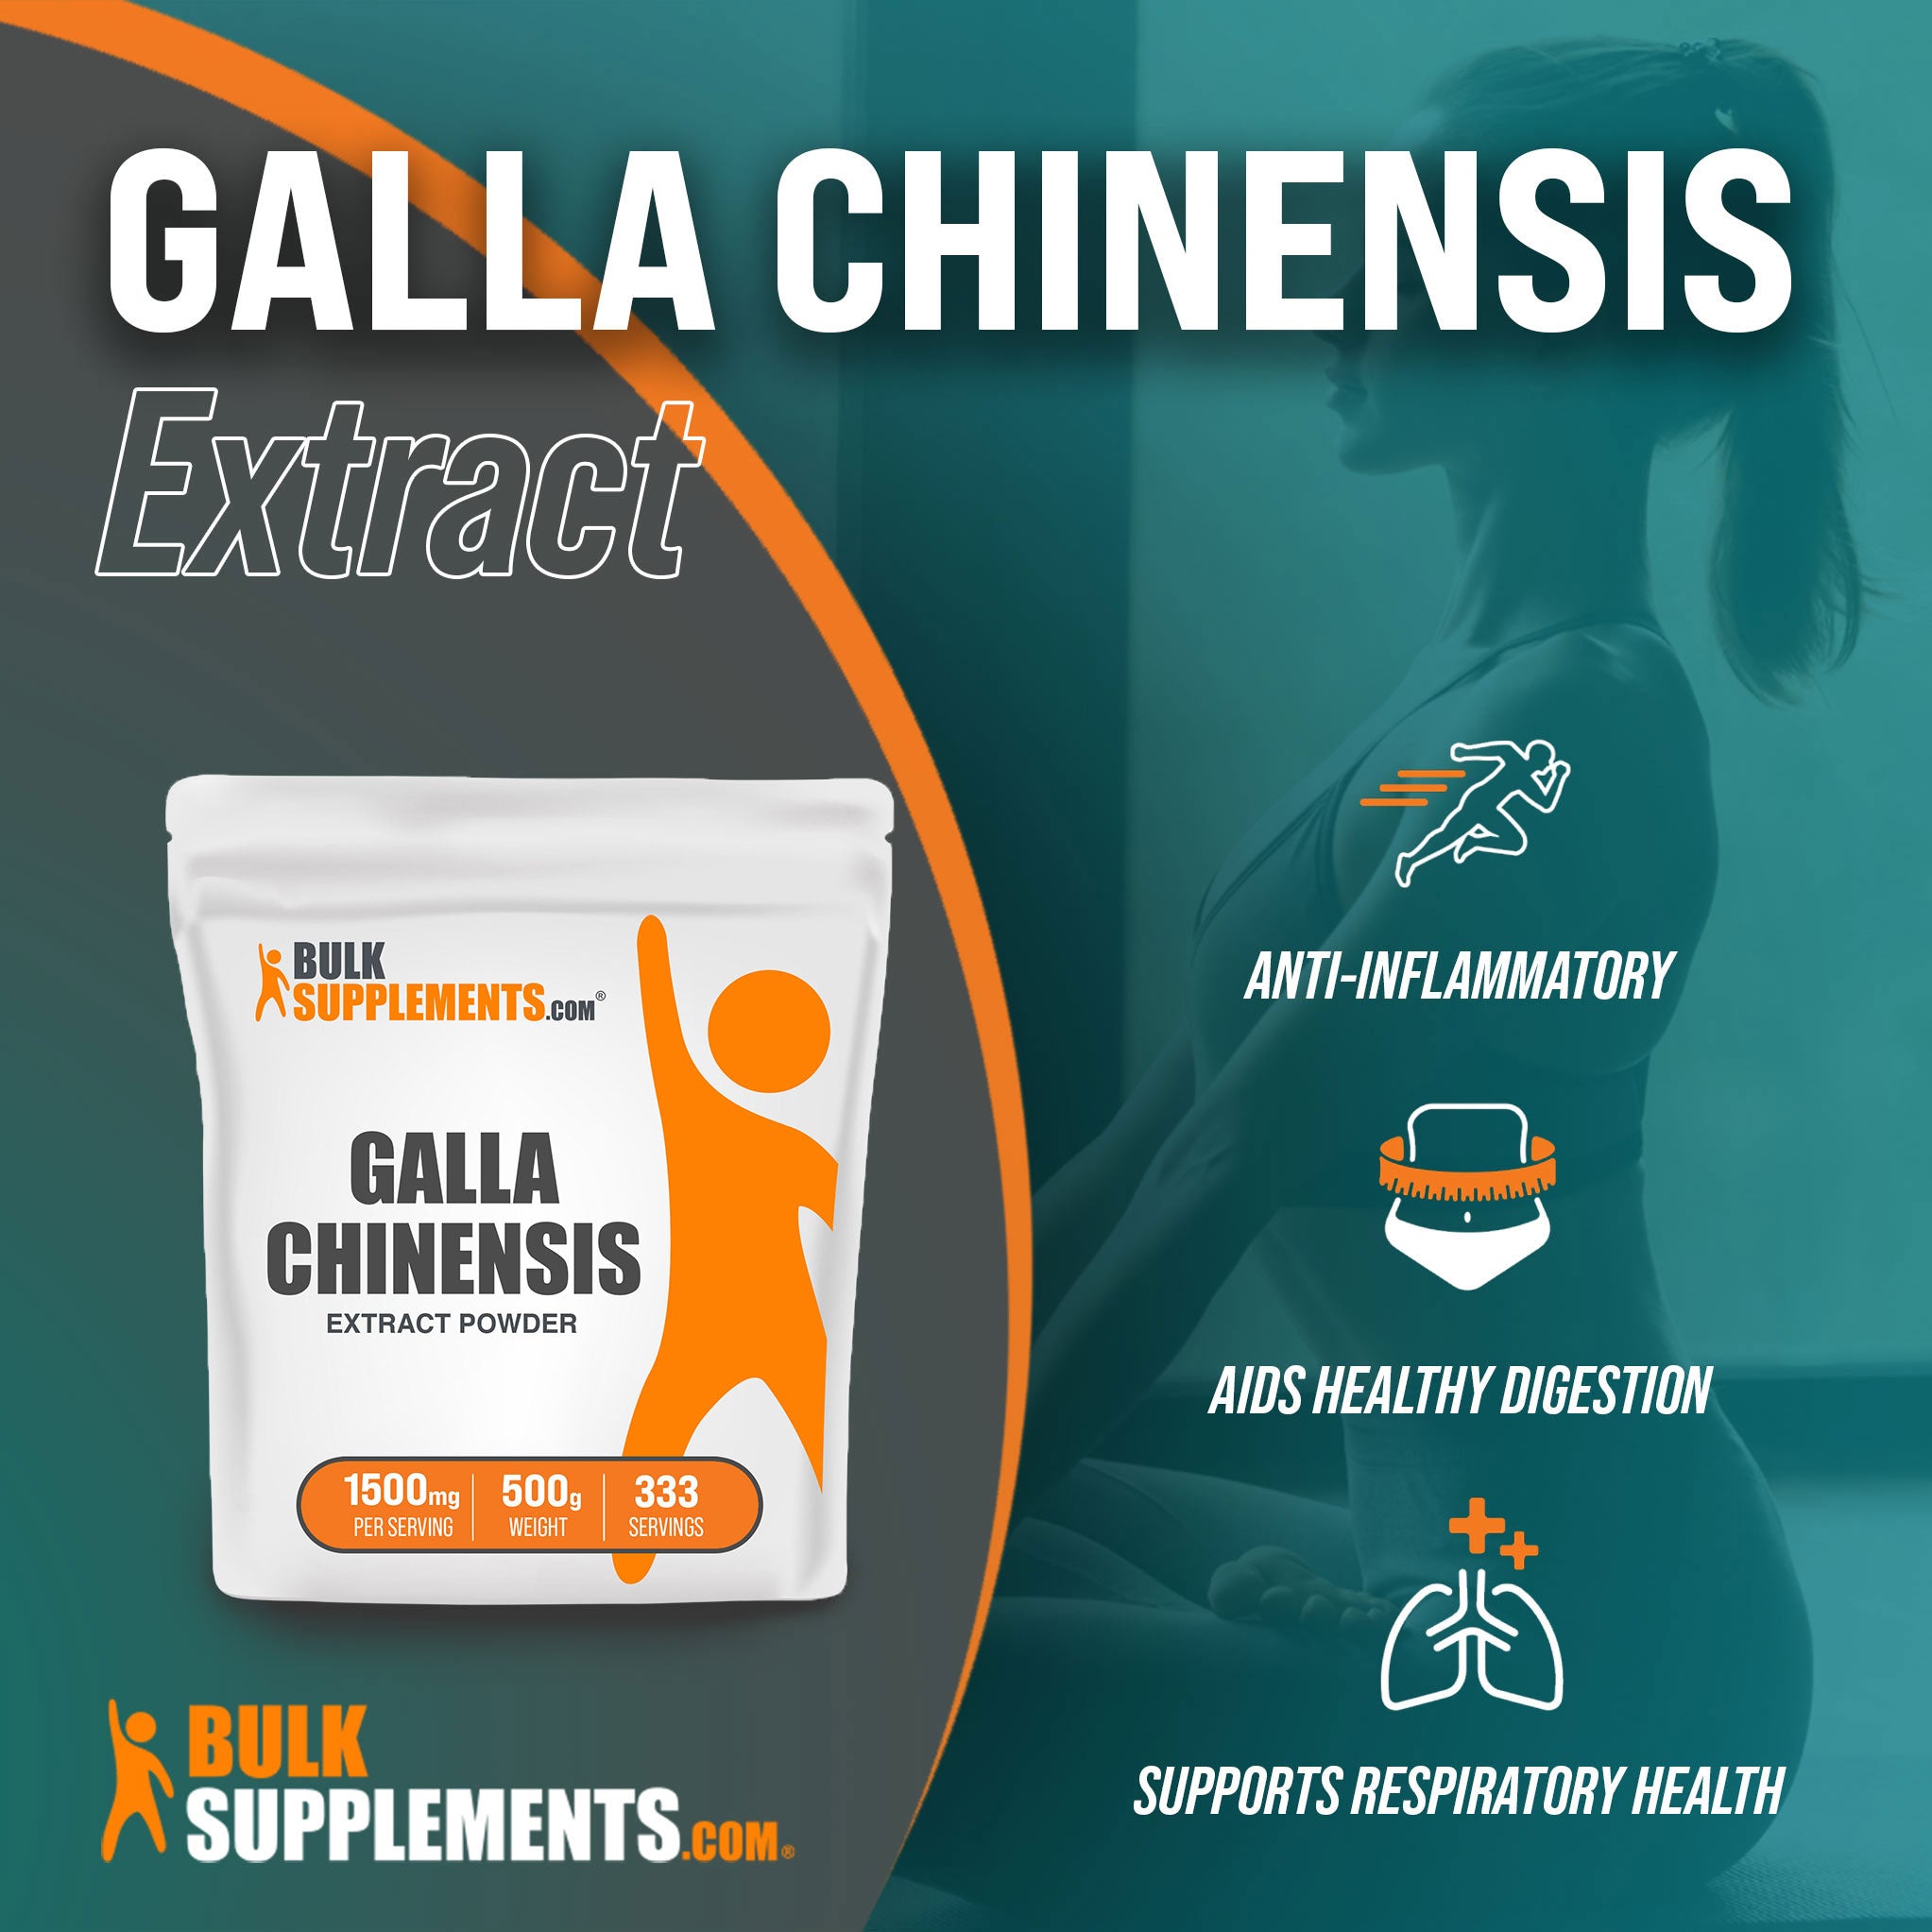 Benefits of Galla Chinensis Extract; anti-inflammatory, aids healthy digestion, supports respiratory health